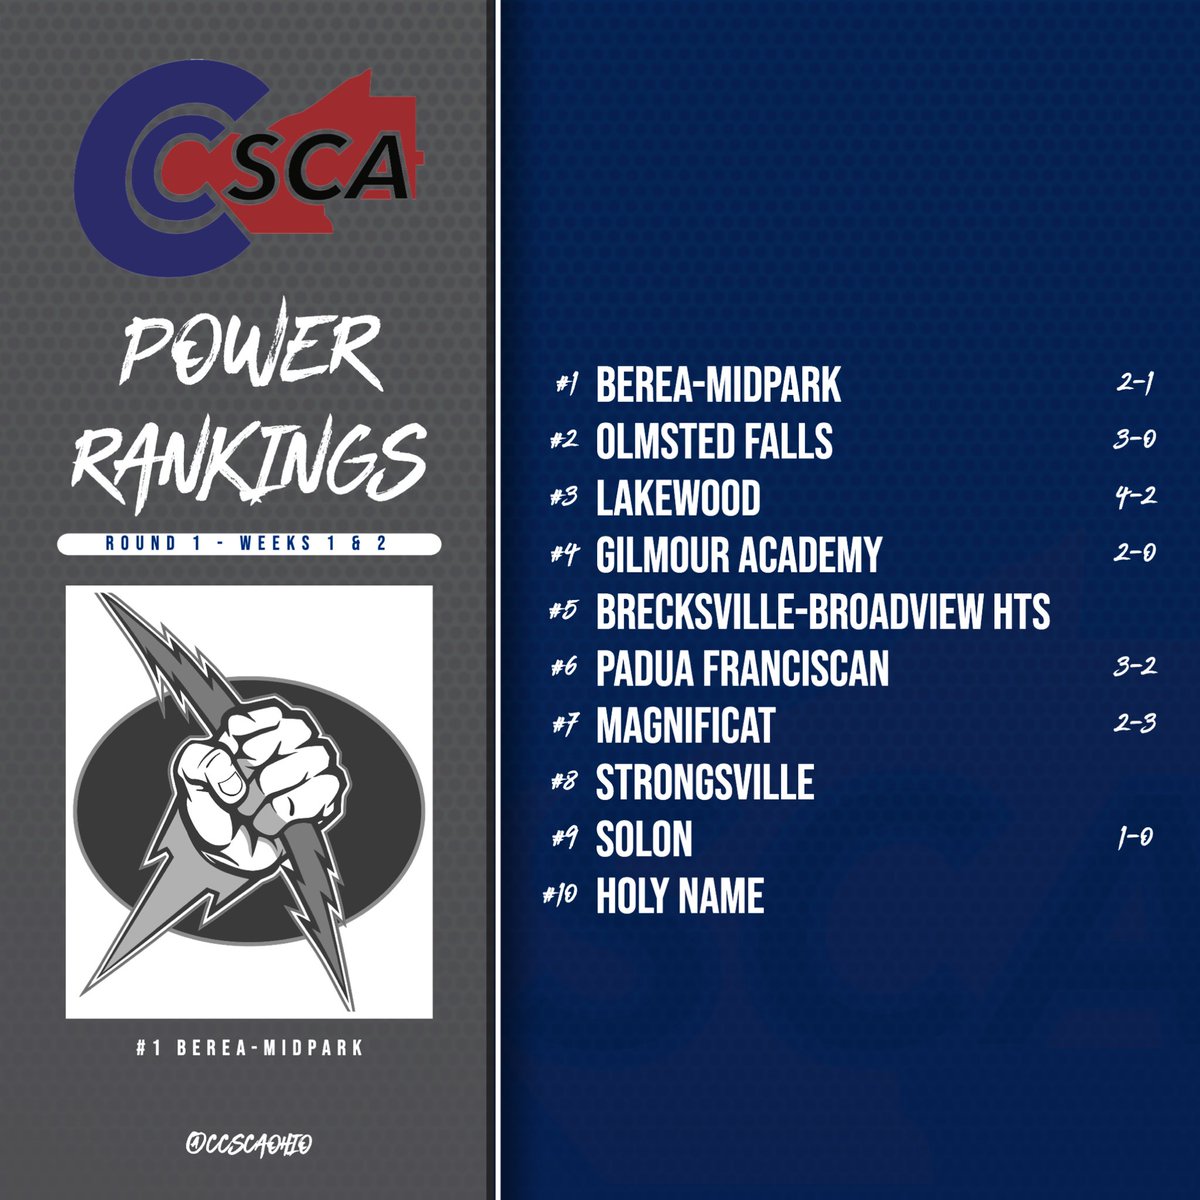 Round 1 (Weeks 1&2) Power Rankings are here! Congrats to Berea-Midpark on finding the top! 🏆 🗳️ Voted on by coaches 🏆 Winners announced every other Wednesday